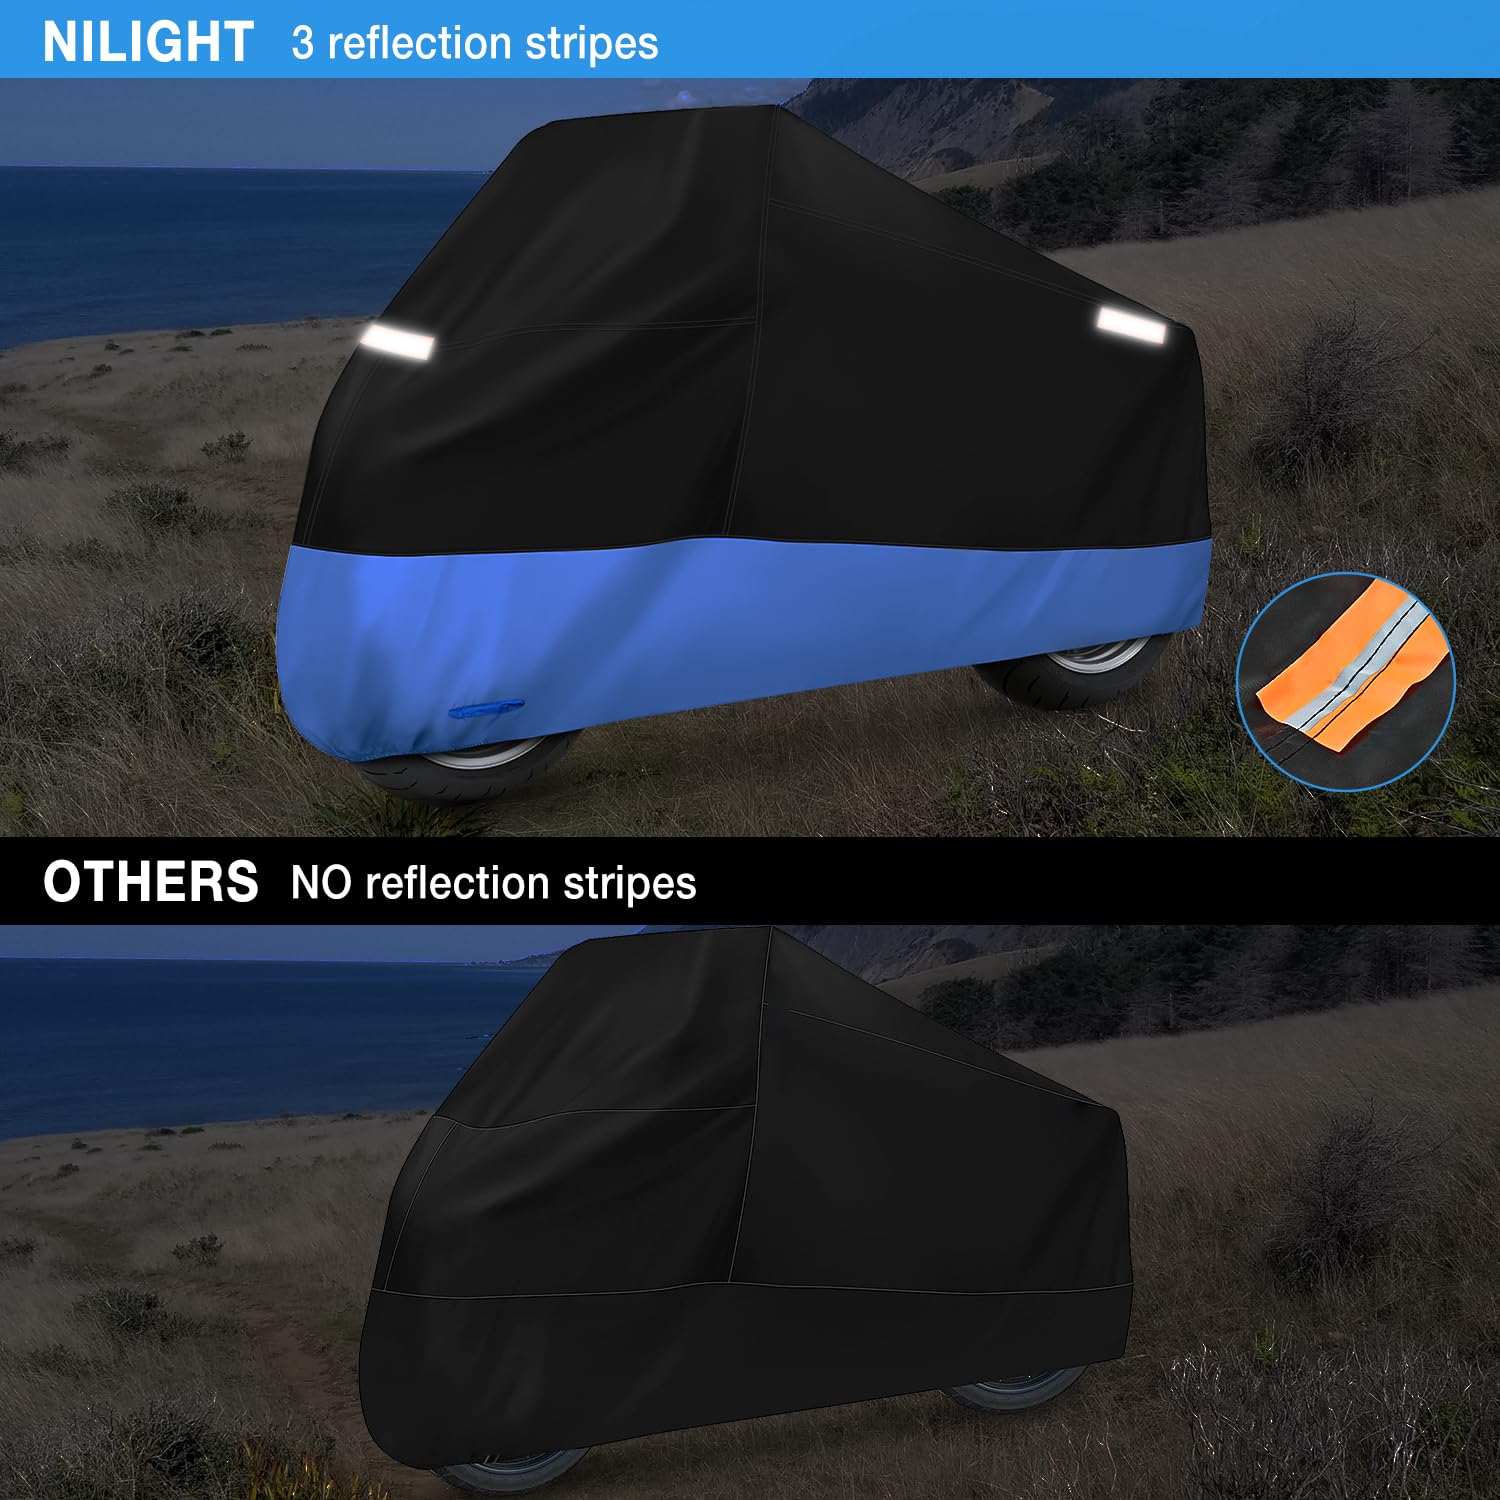 Nilight Motorcycle Cover All Season Universal Oxford Fabric with Lock-Hole Waterproof Durable UV with Storage Bag & Protective Reflective Strip Fits up to 108